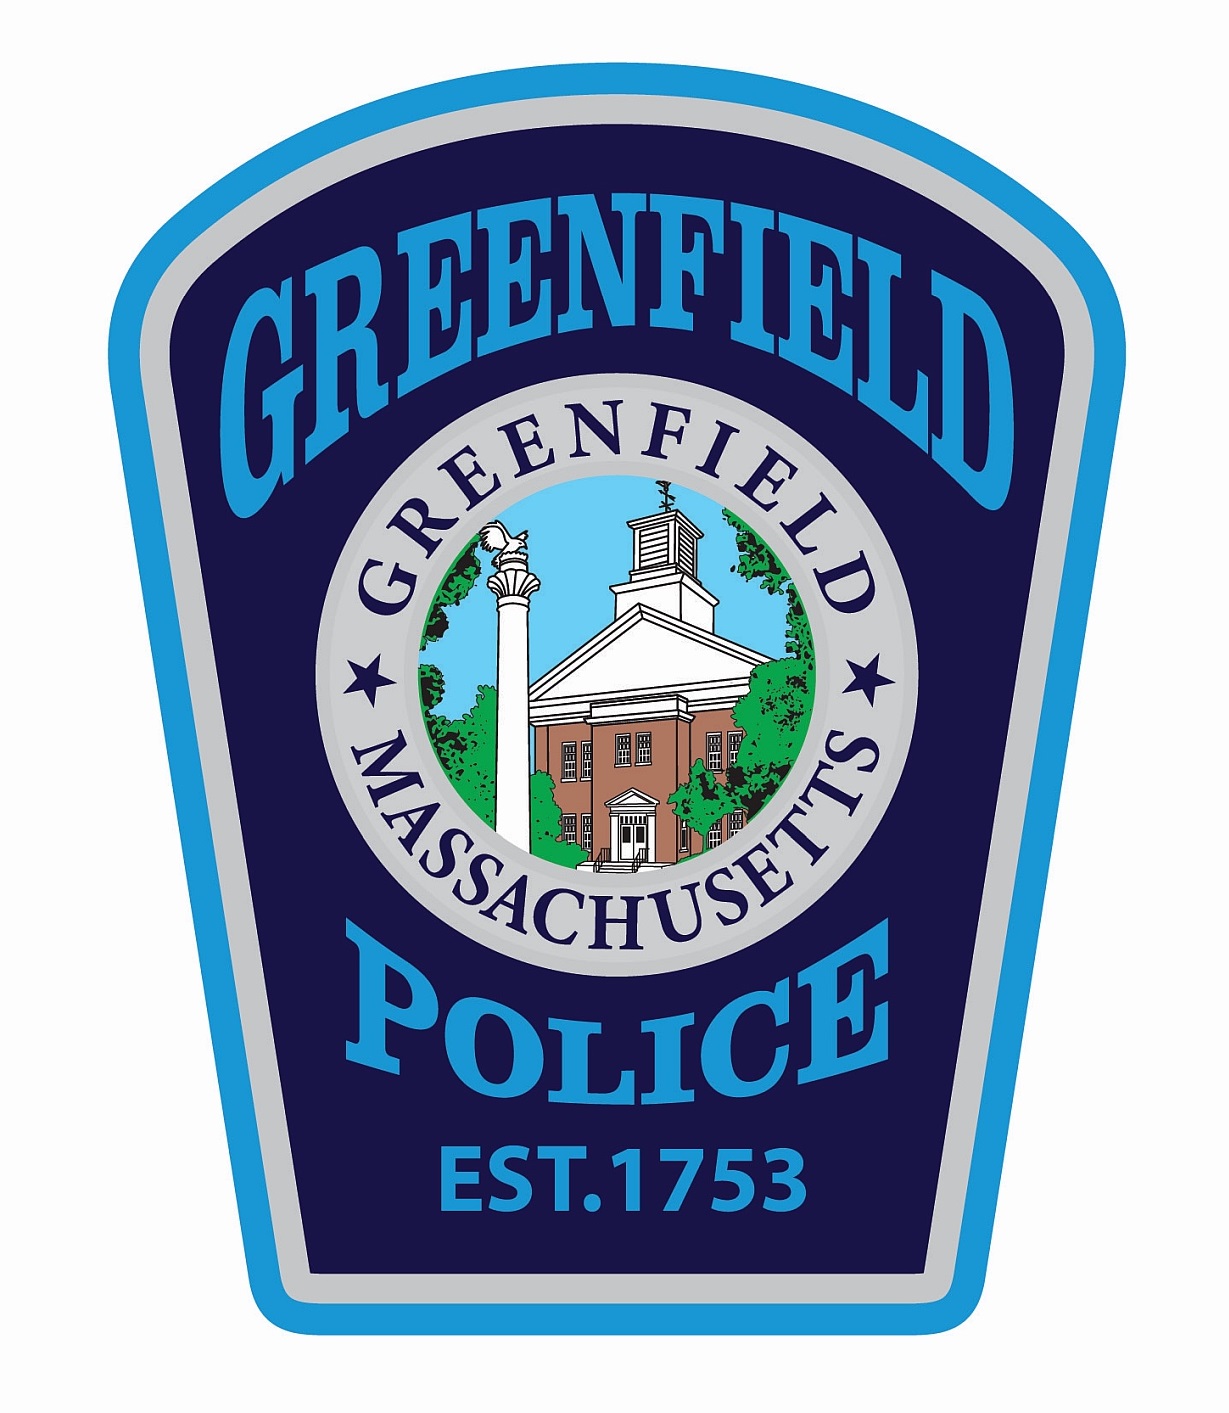 Greenfield Police Department, MA Police Jobs